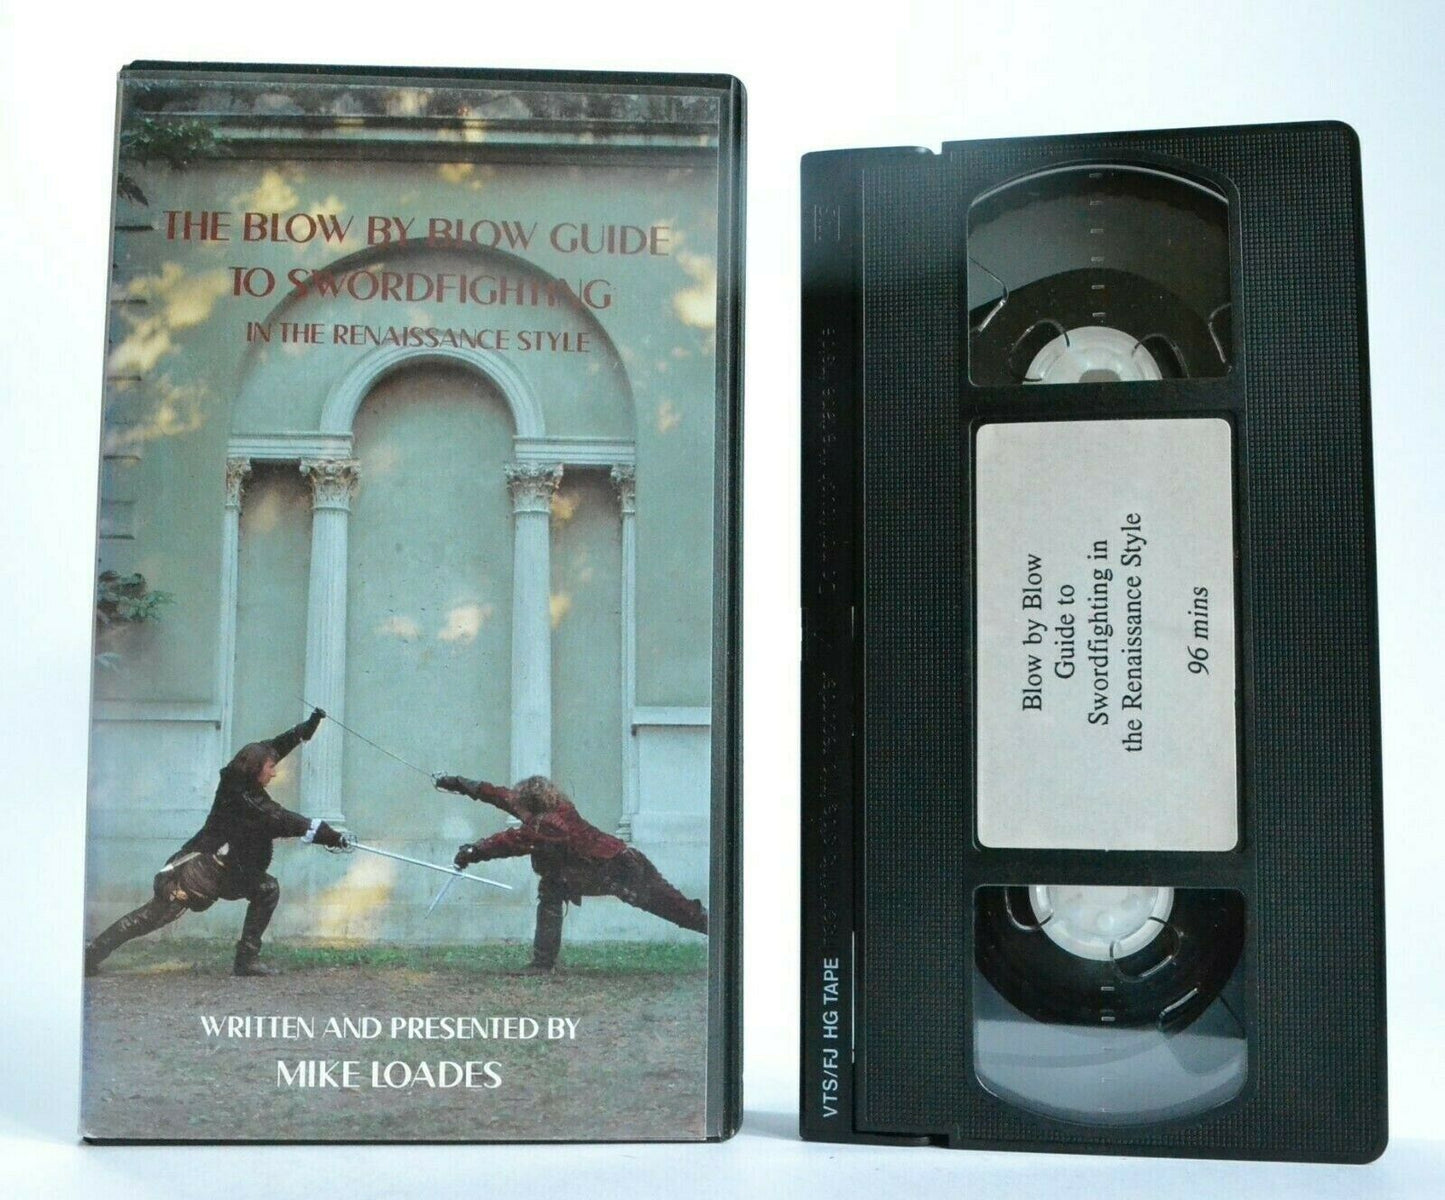 The Blow By Blow Guide To Swordfighting: Mike Loades - Renaissance Style - VHS-